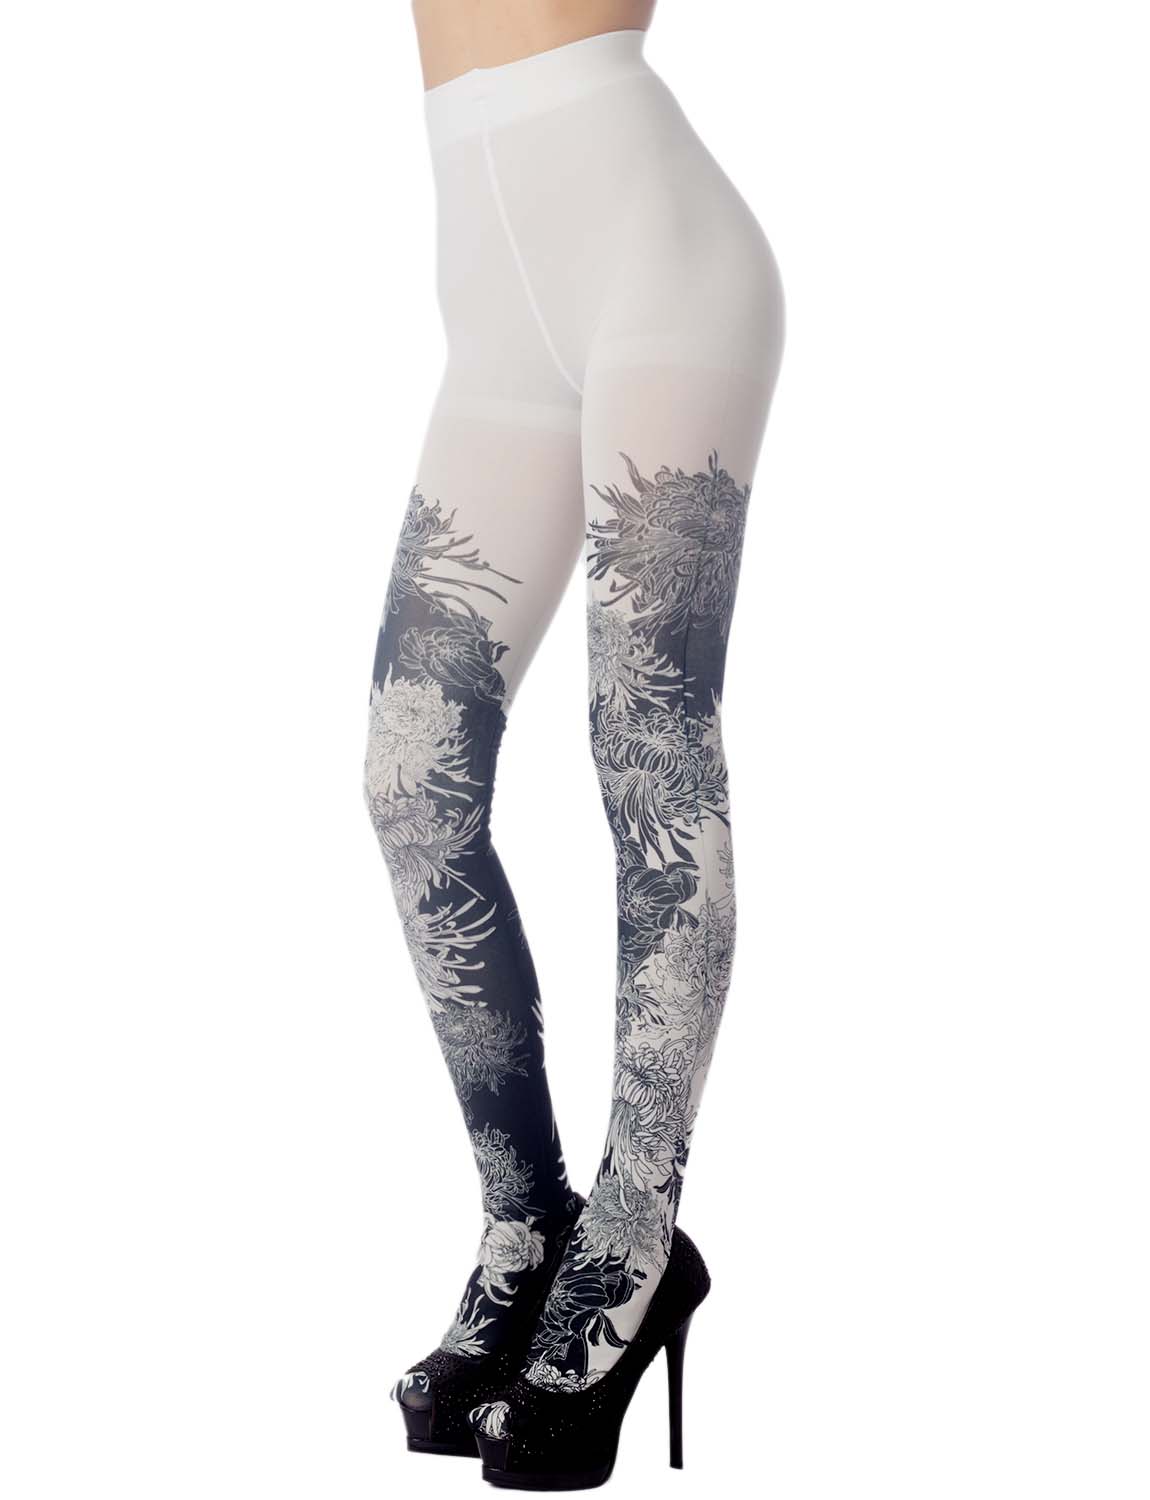 Women's Opaque Fairview Daisy Patterned Footed Thick Seam Pantyhose Tights